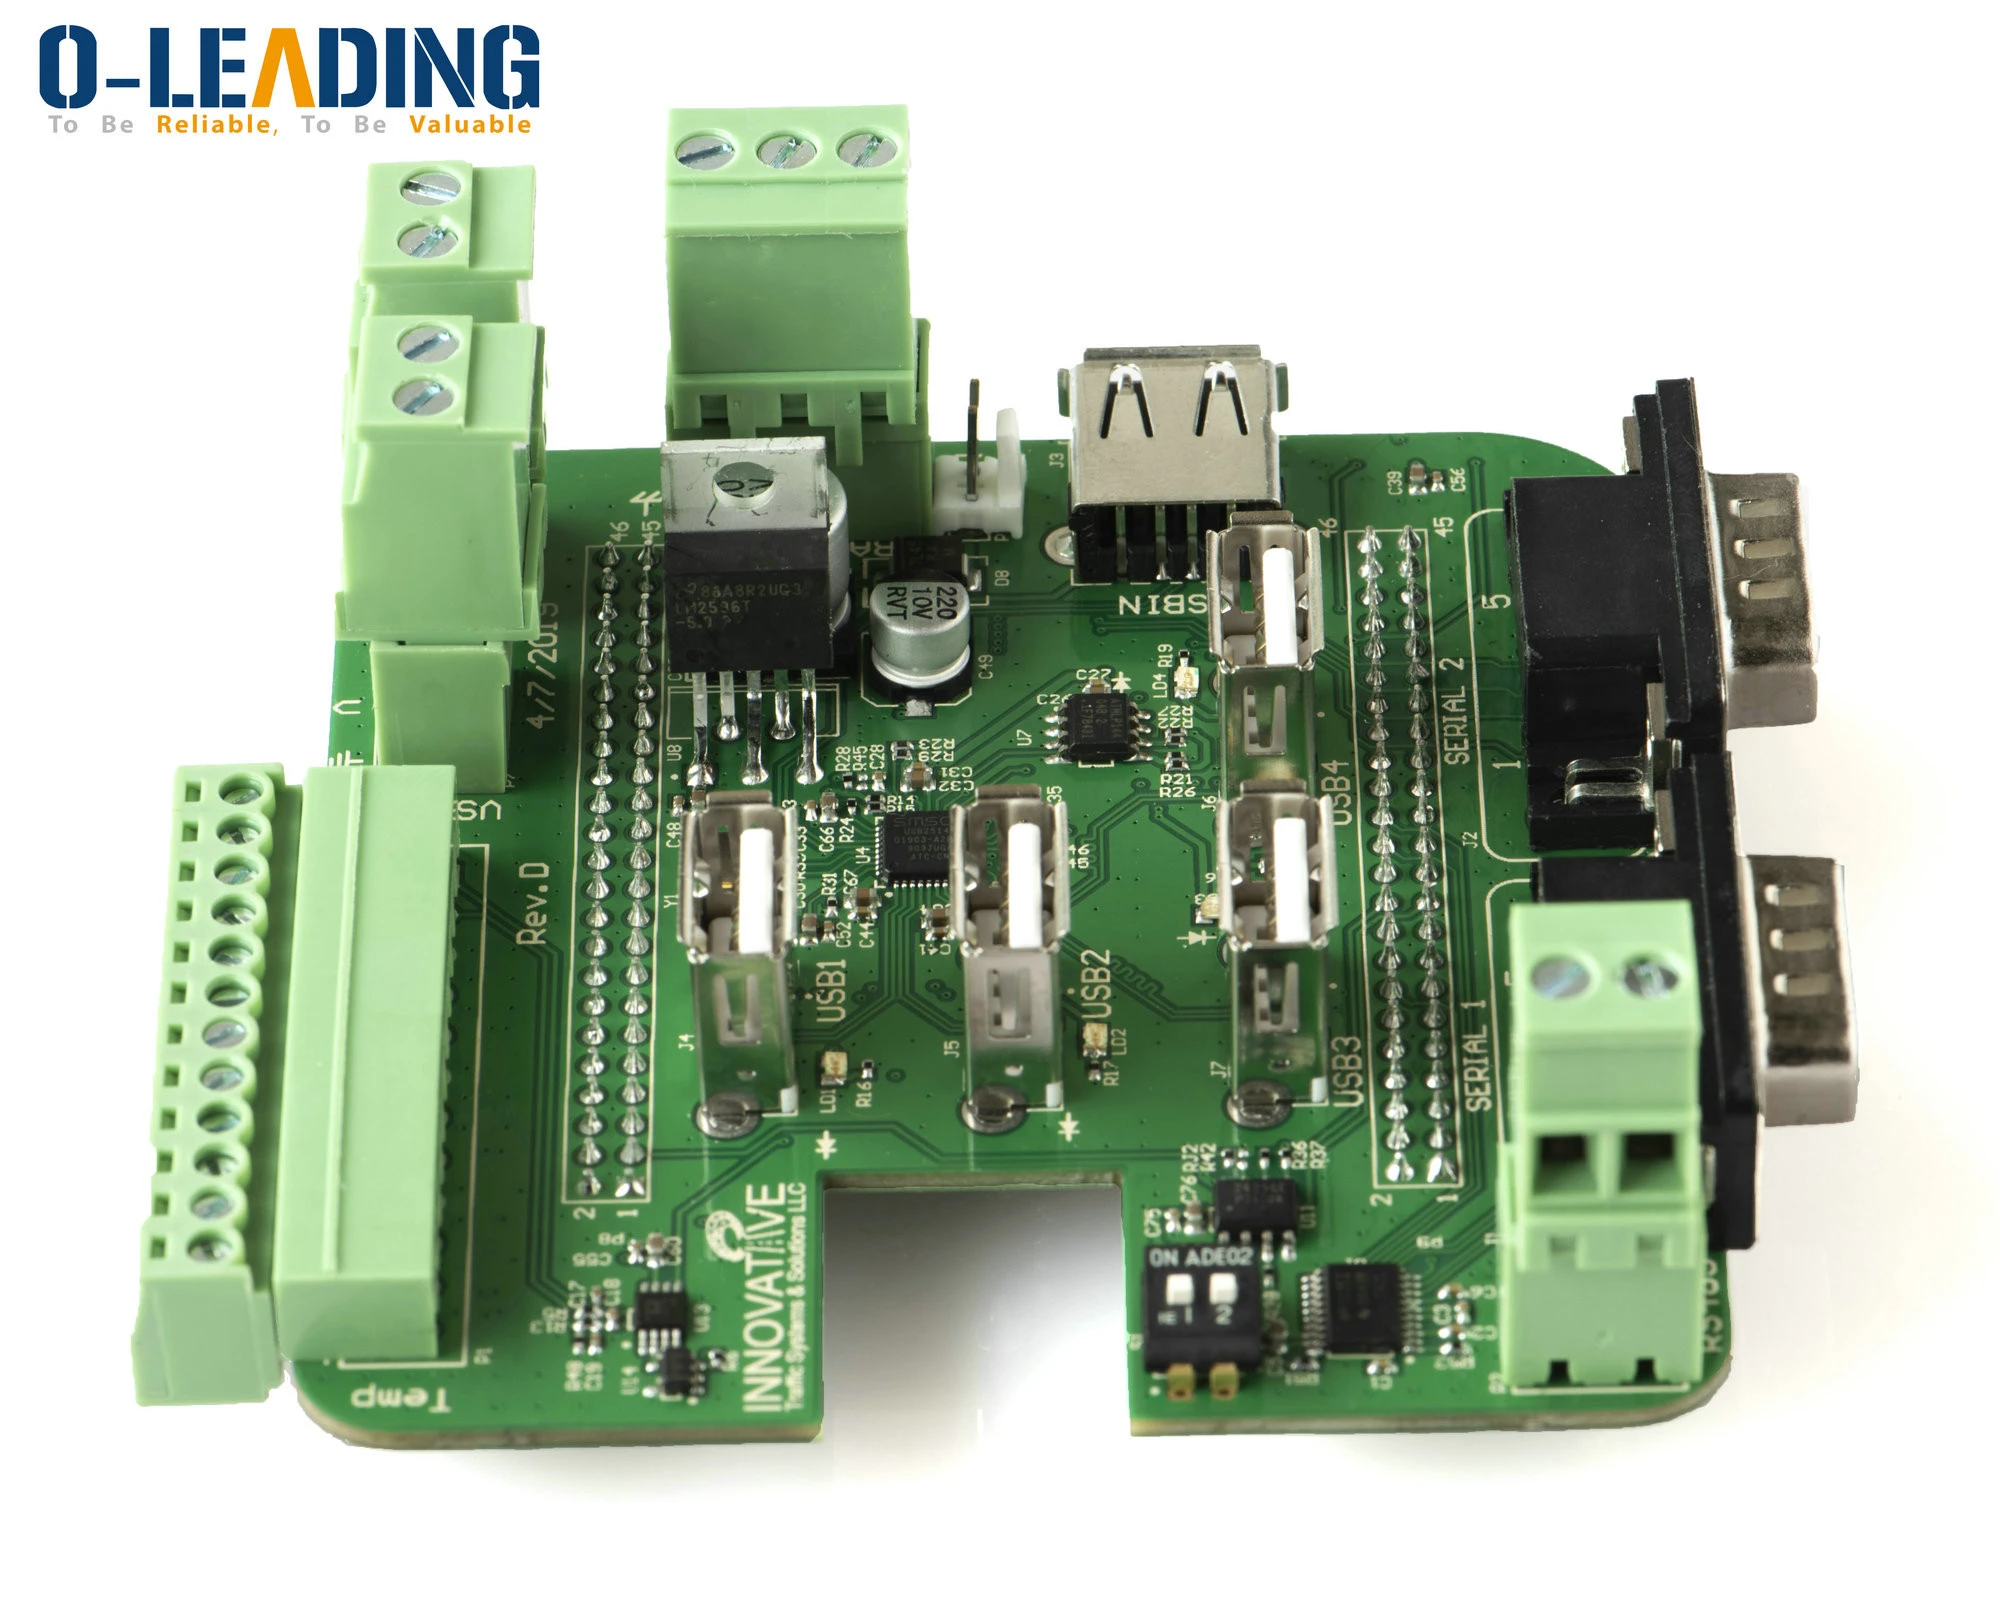 High quality Keyboard pcb &amp; pcba Factory SMT DIP Bare PCB And Electronic Components Assembly One-stop Service